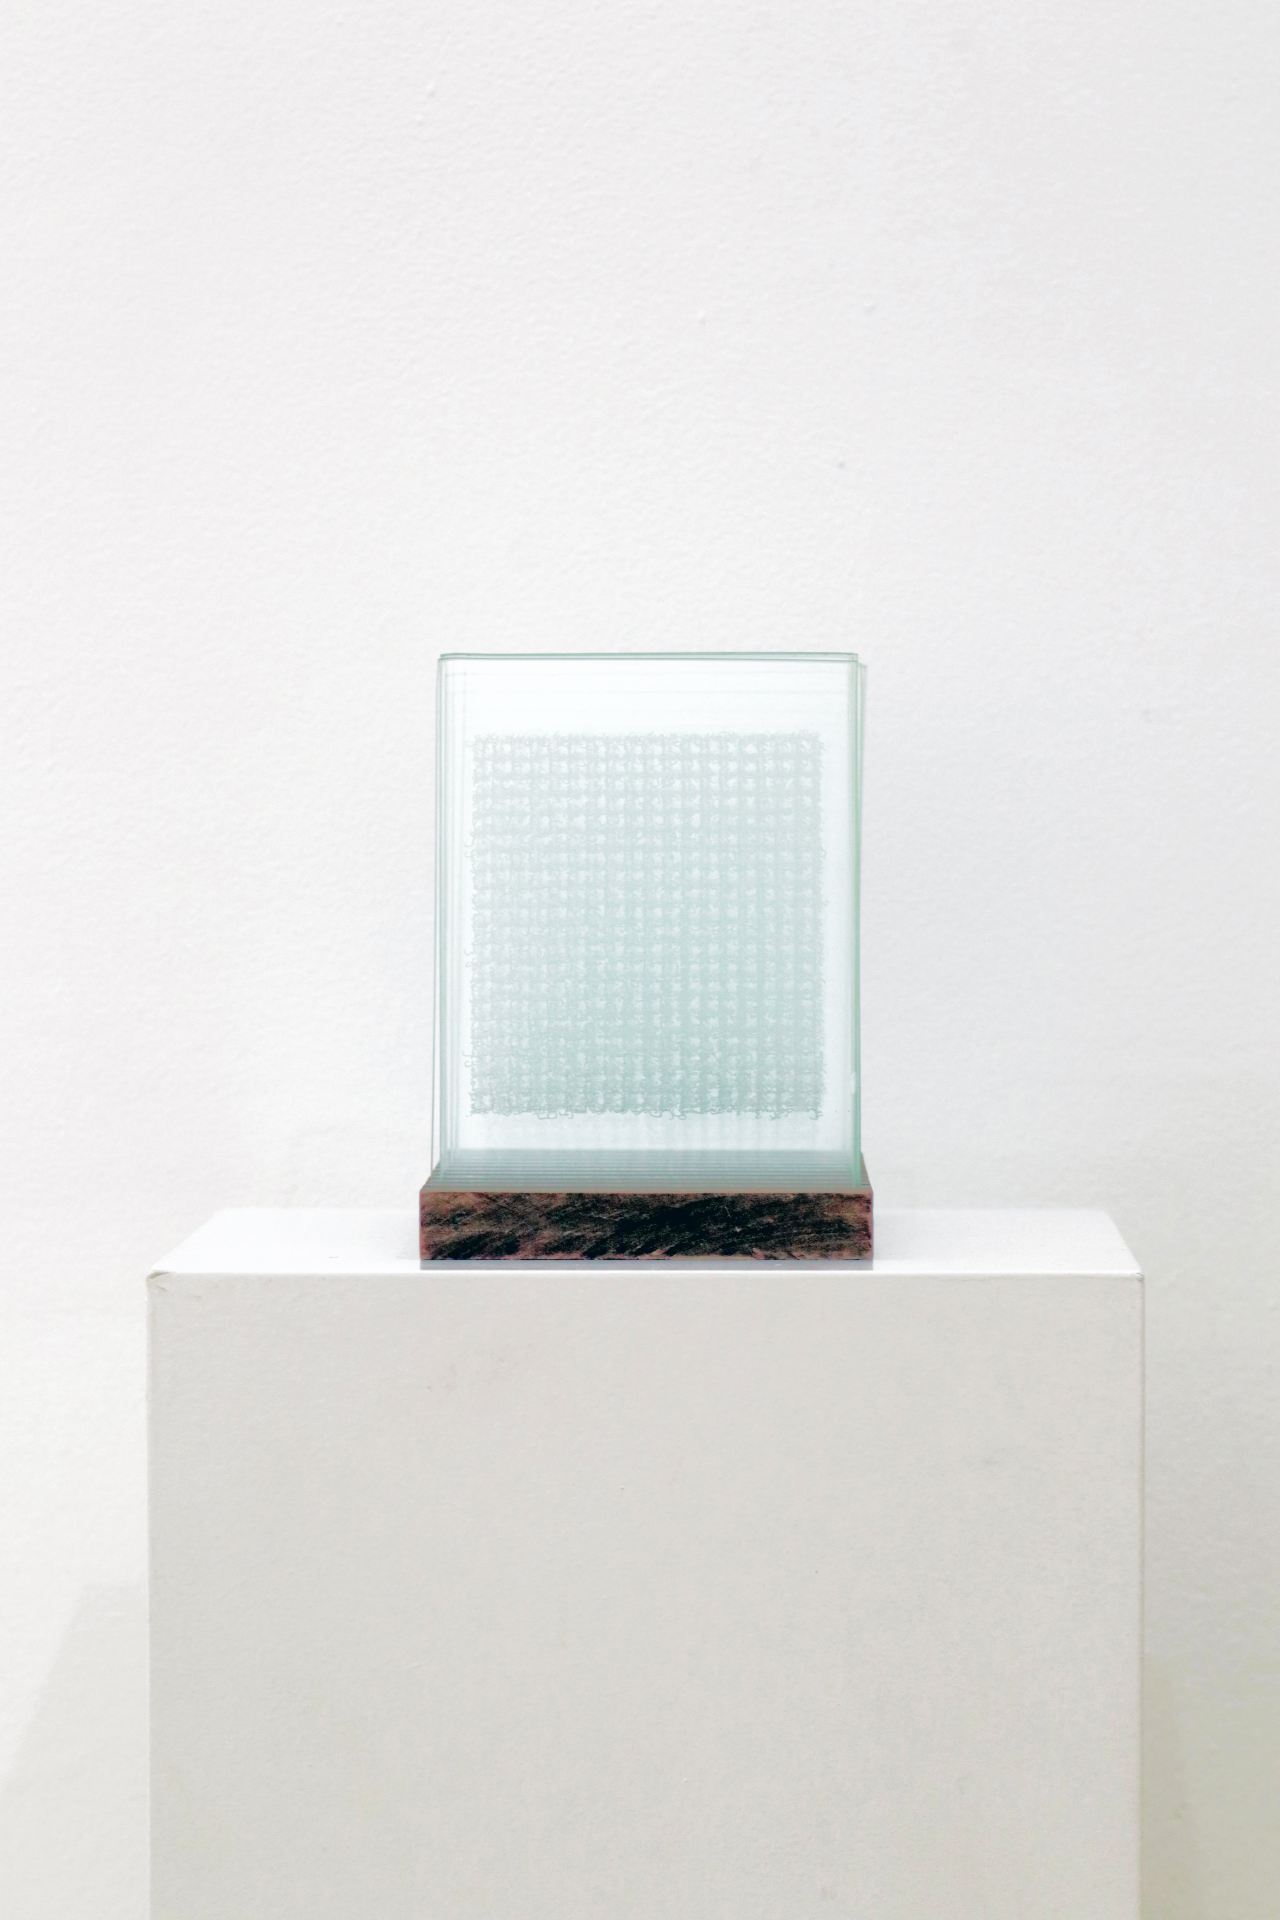 A sculpture made of several rectangular pieces of glass what are etched with writing and set in a wooden block, atop a white plinth.